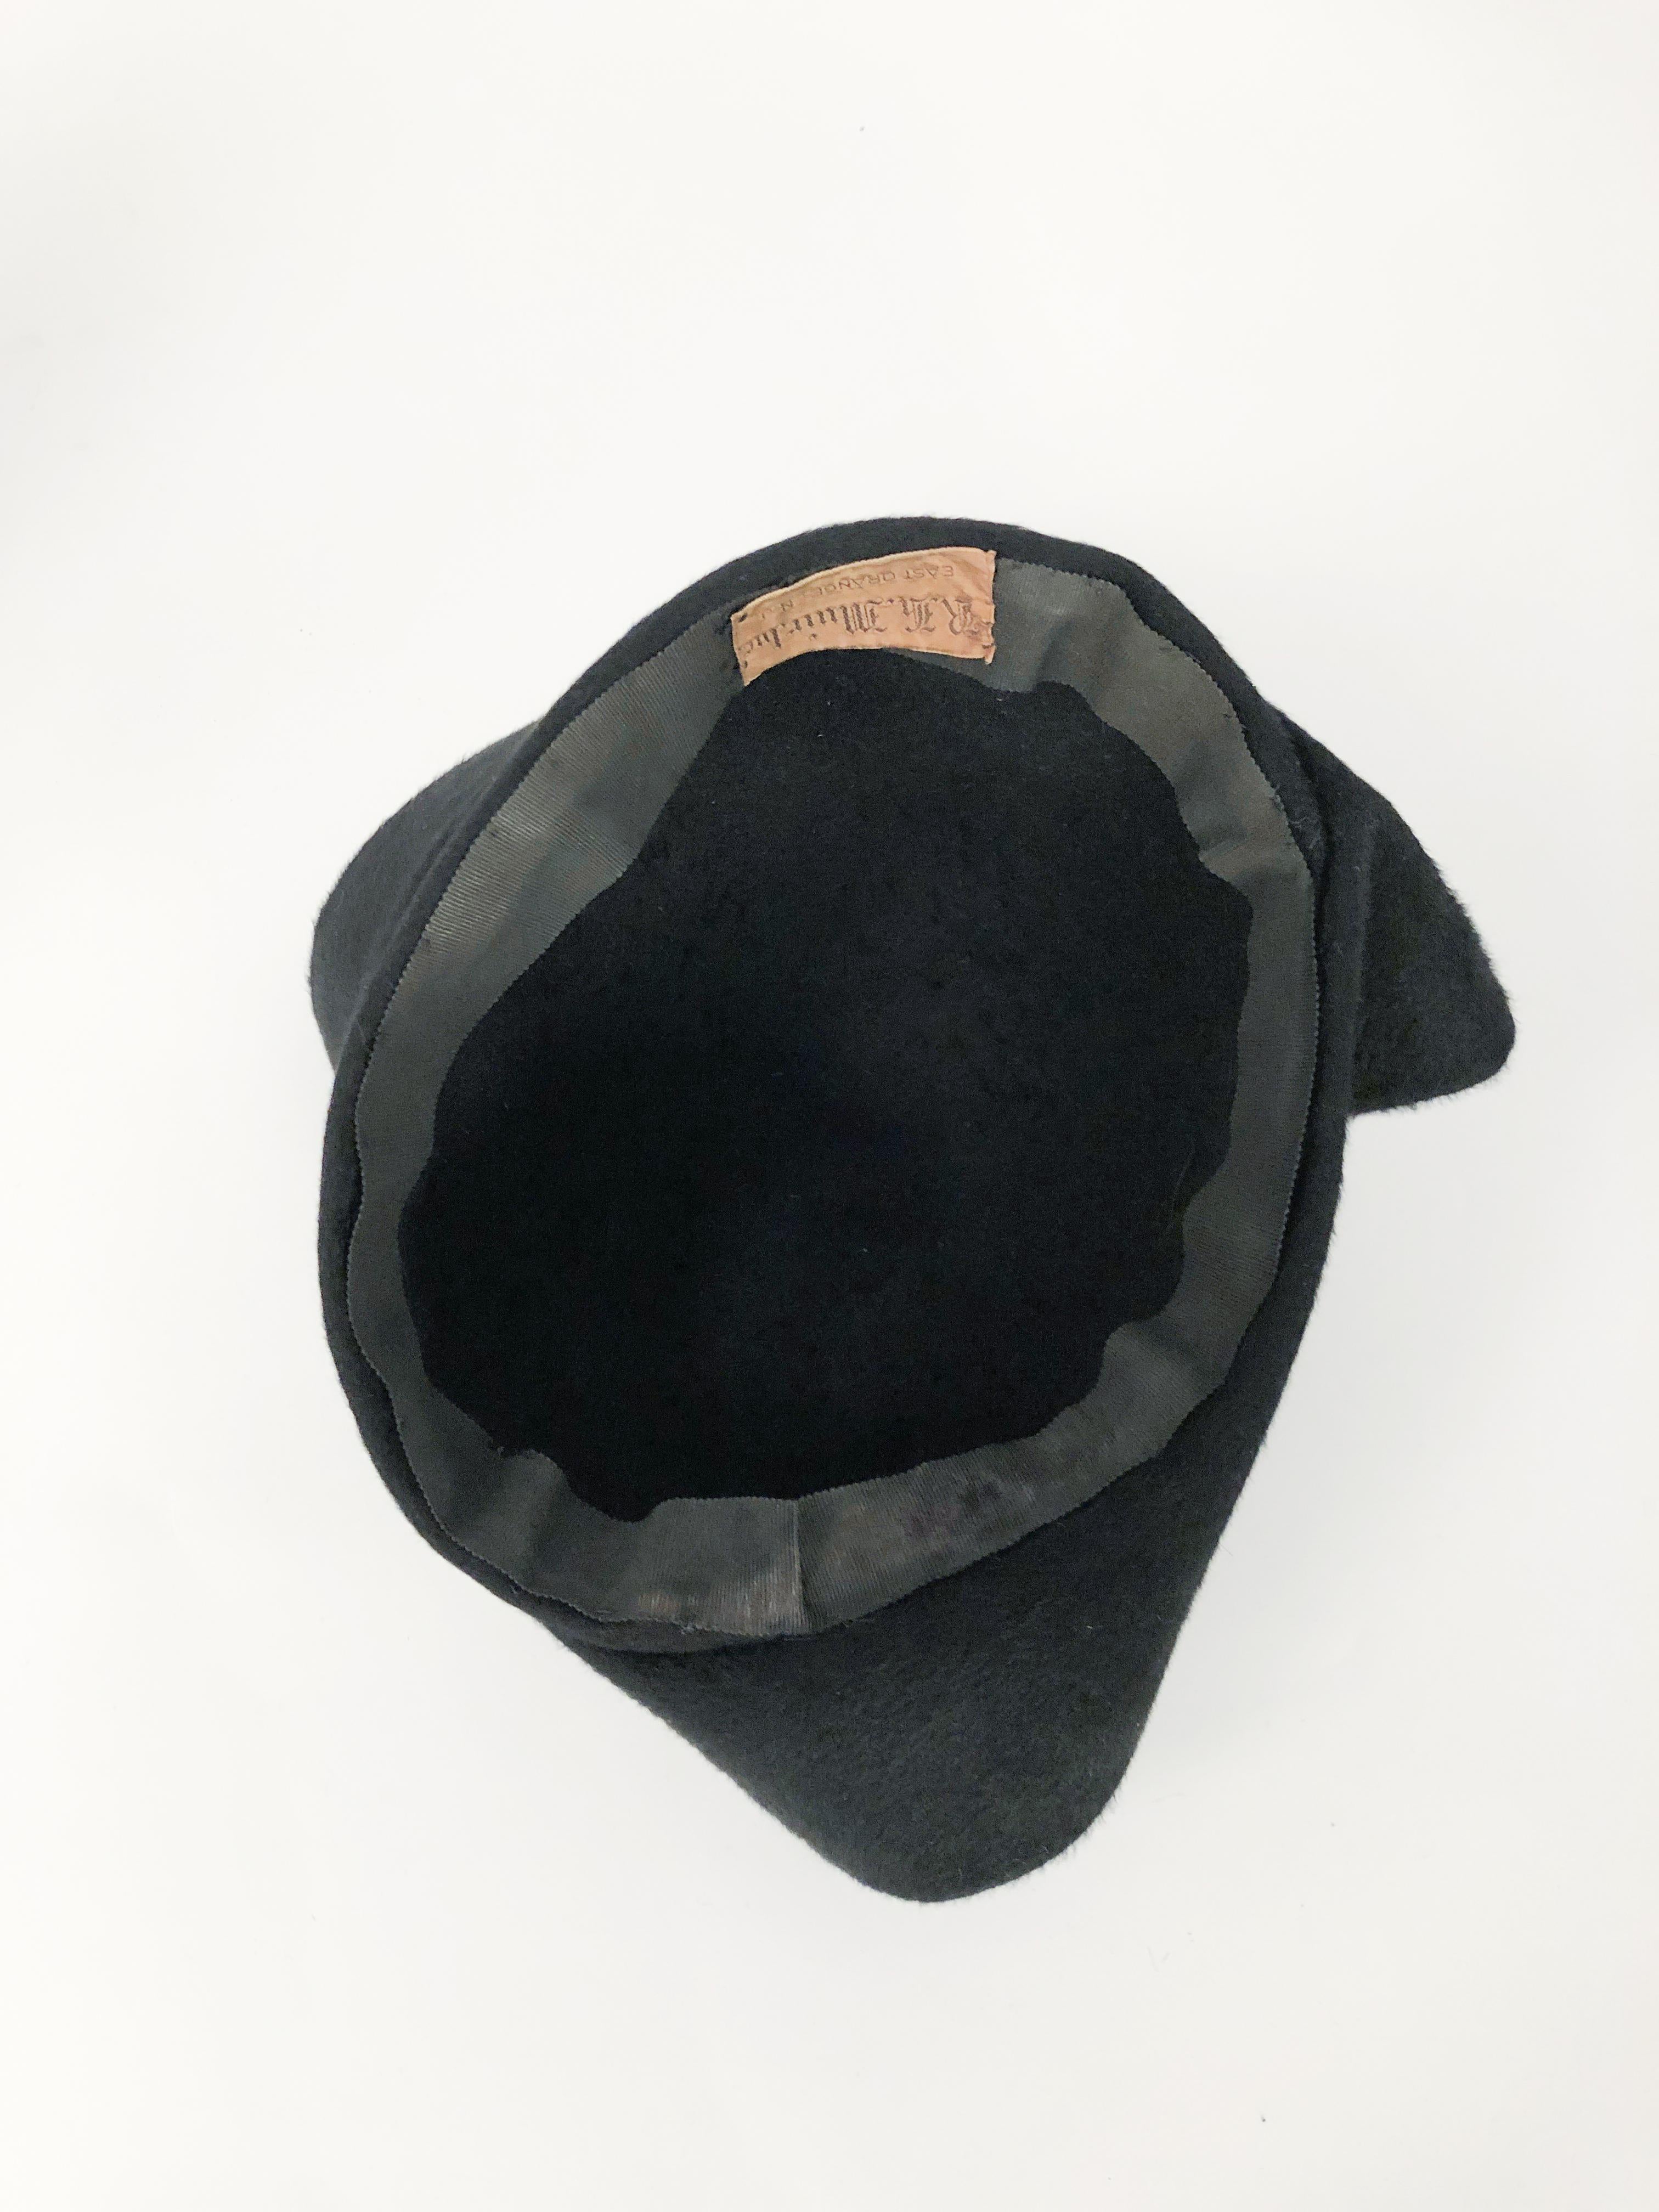 Women's 1930s Black Cashmere Felt Pirate Hat with Sterling Silver Accent